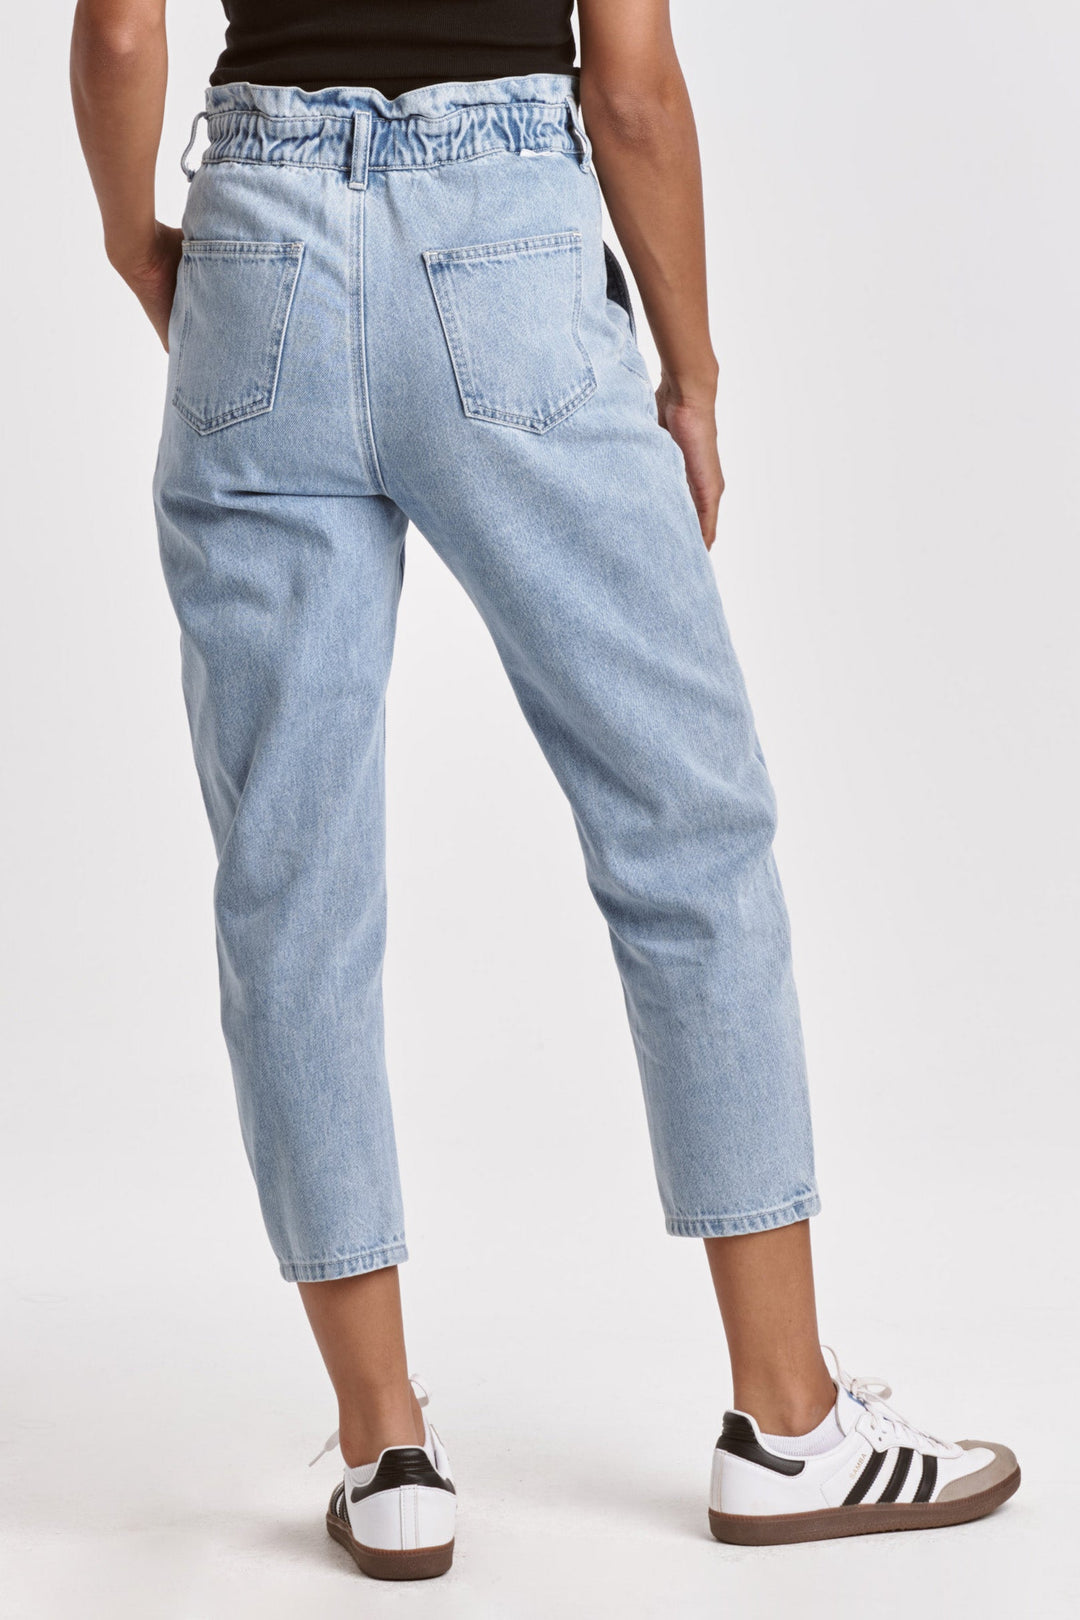 valerie-ultra-high-rise-cropped-baggy-jeans-zylo